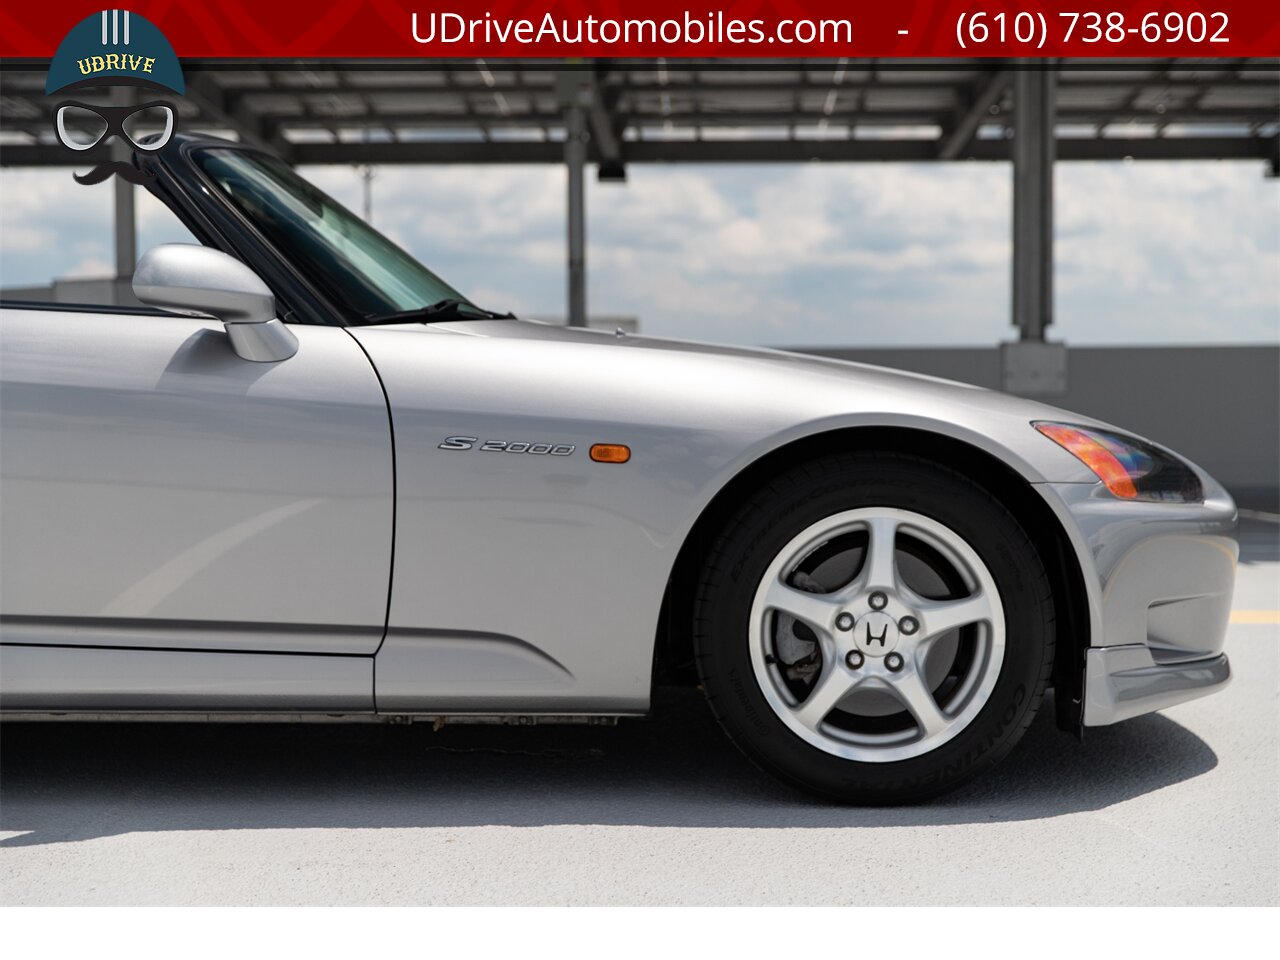 2001 Honda S2000 9k Miles Same Owner Since 2001 Service History   - Photo 13 - West Chester, PA 19382